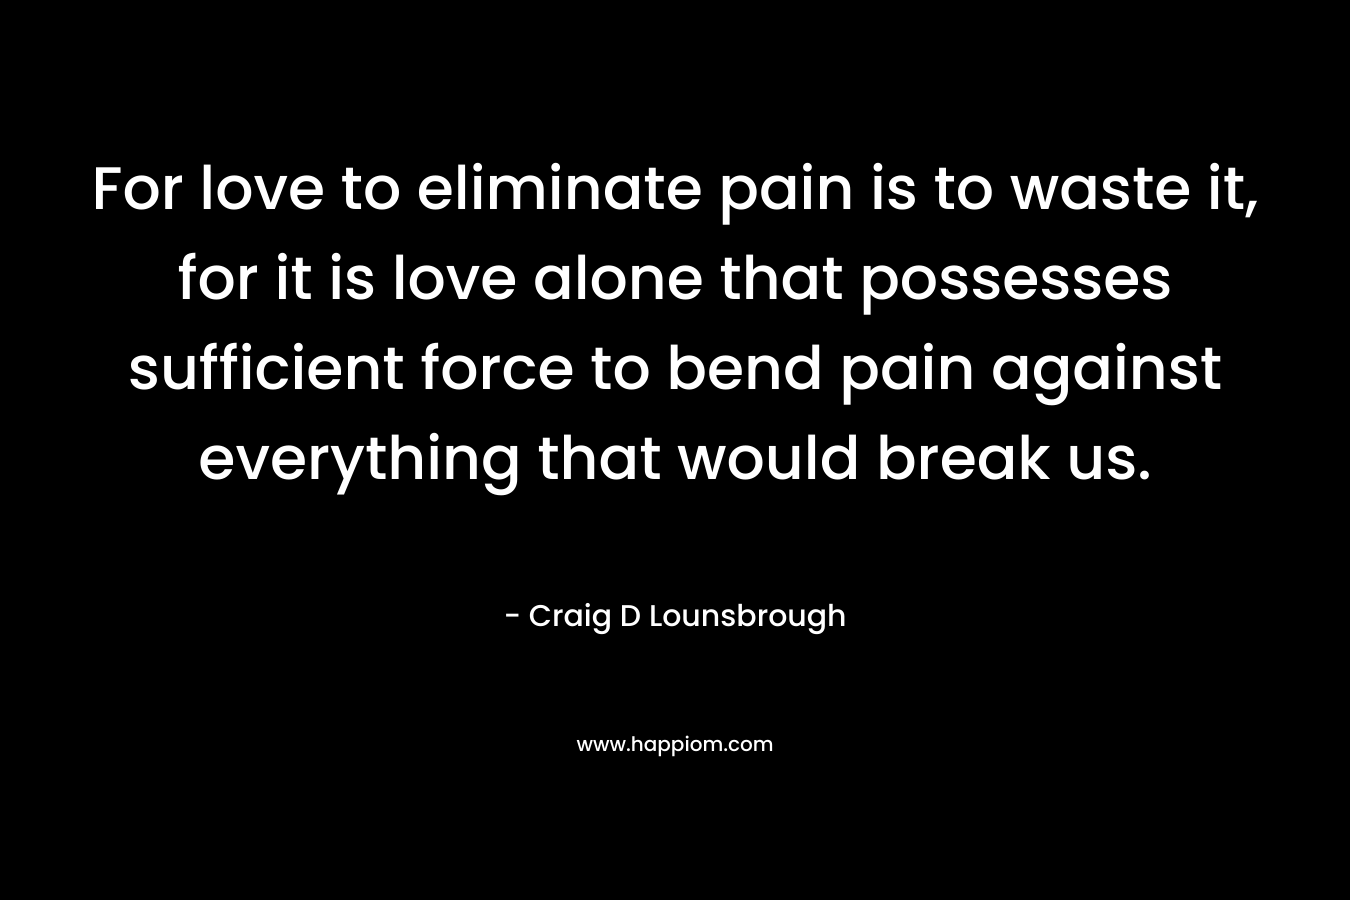 For love to eliminate pain is to waste it, for it is love alone that possesses sufficient force to bend pain against everything that would break us.